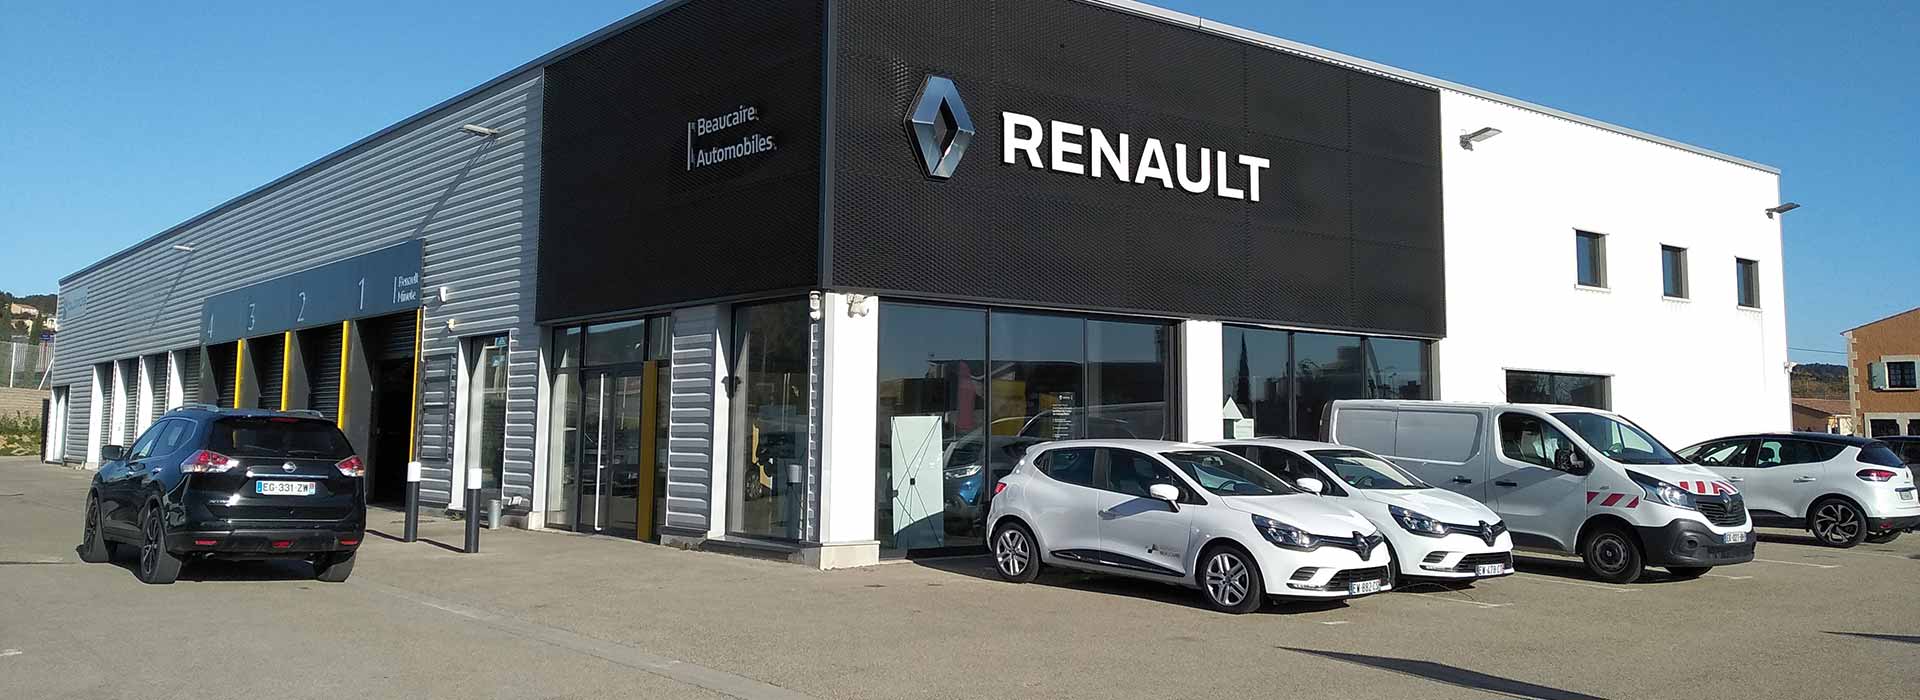 Renault Beaucaire